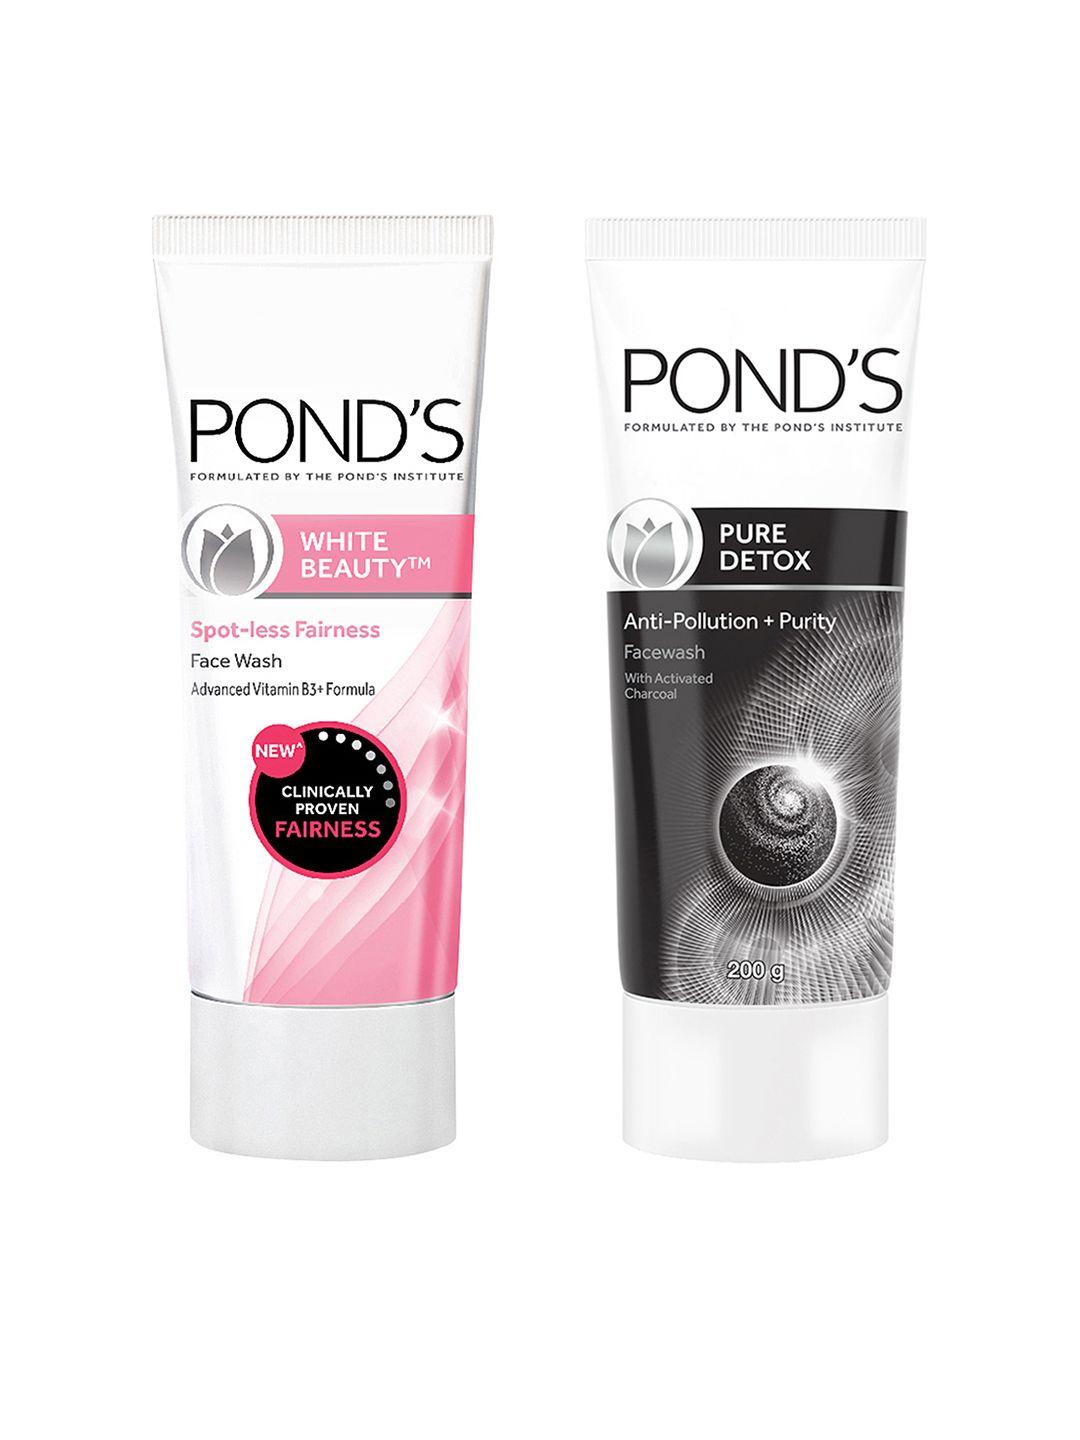 ponds-set-of-white-beauty-spotless-fairness-&-anti-pollution-activated-charcoal-face-wash